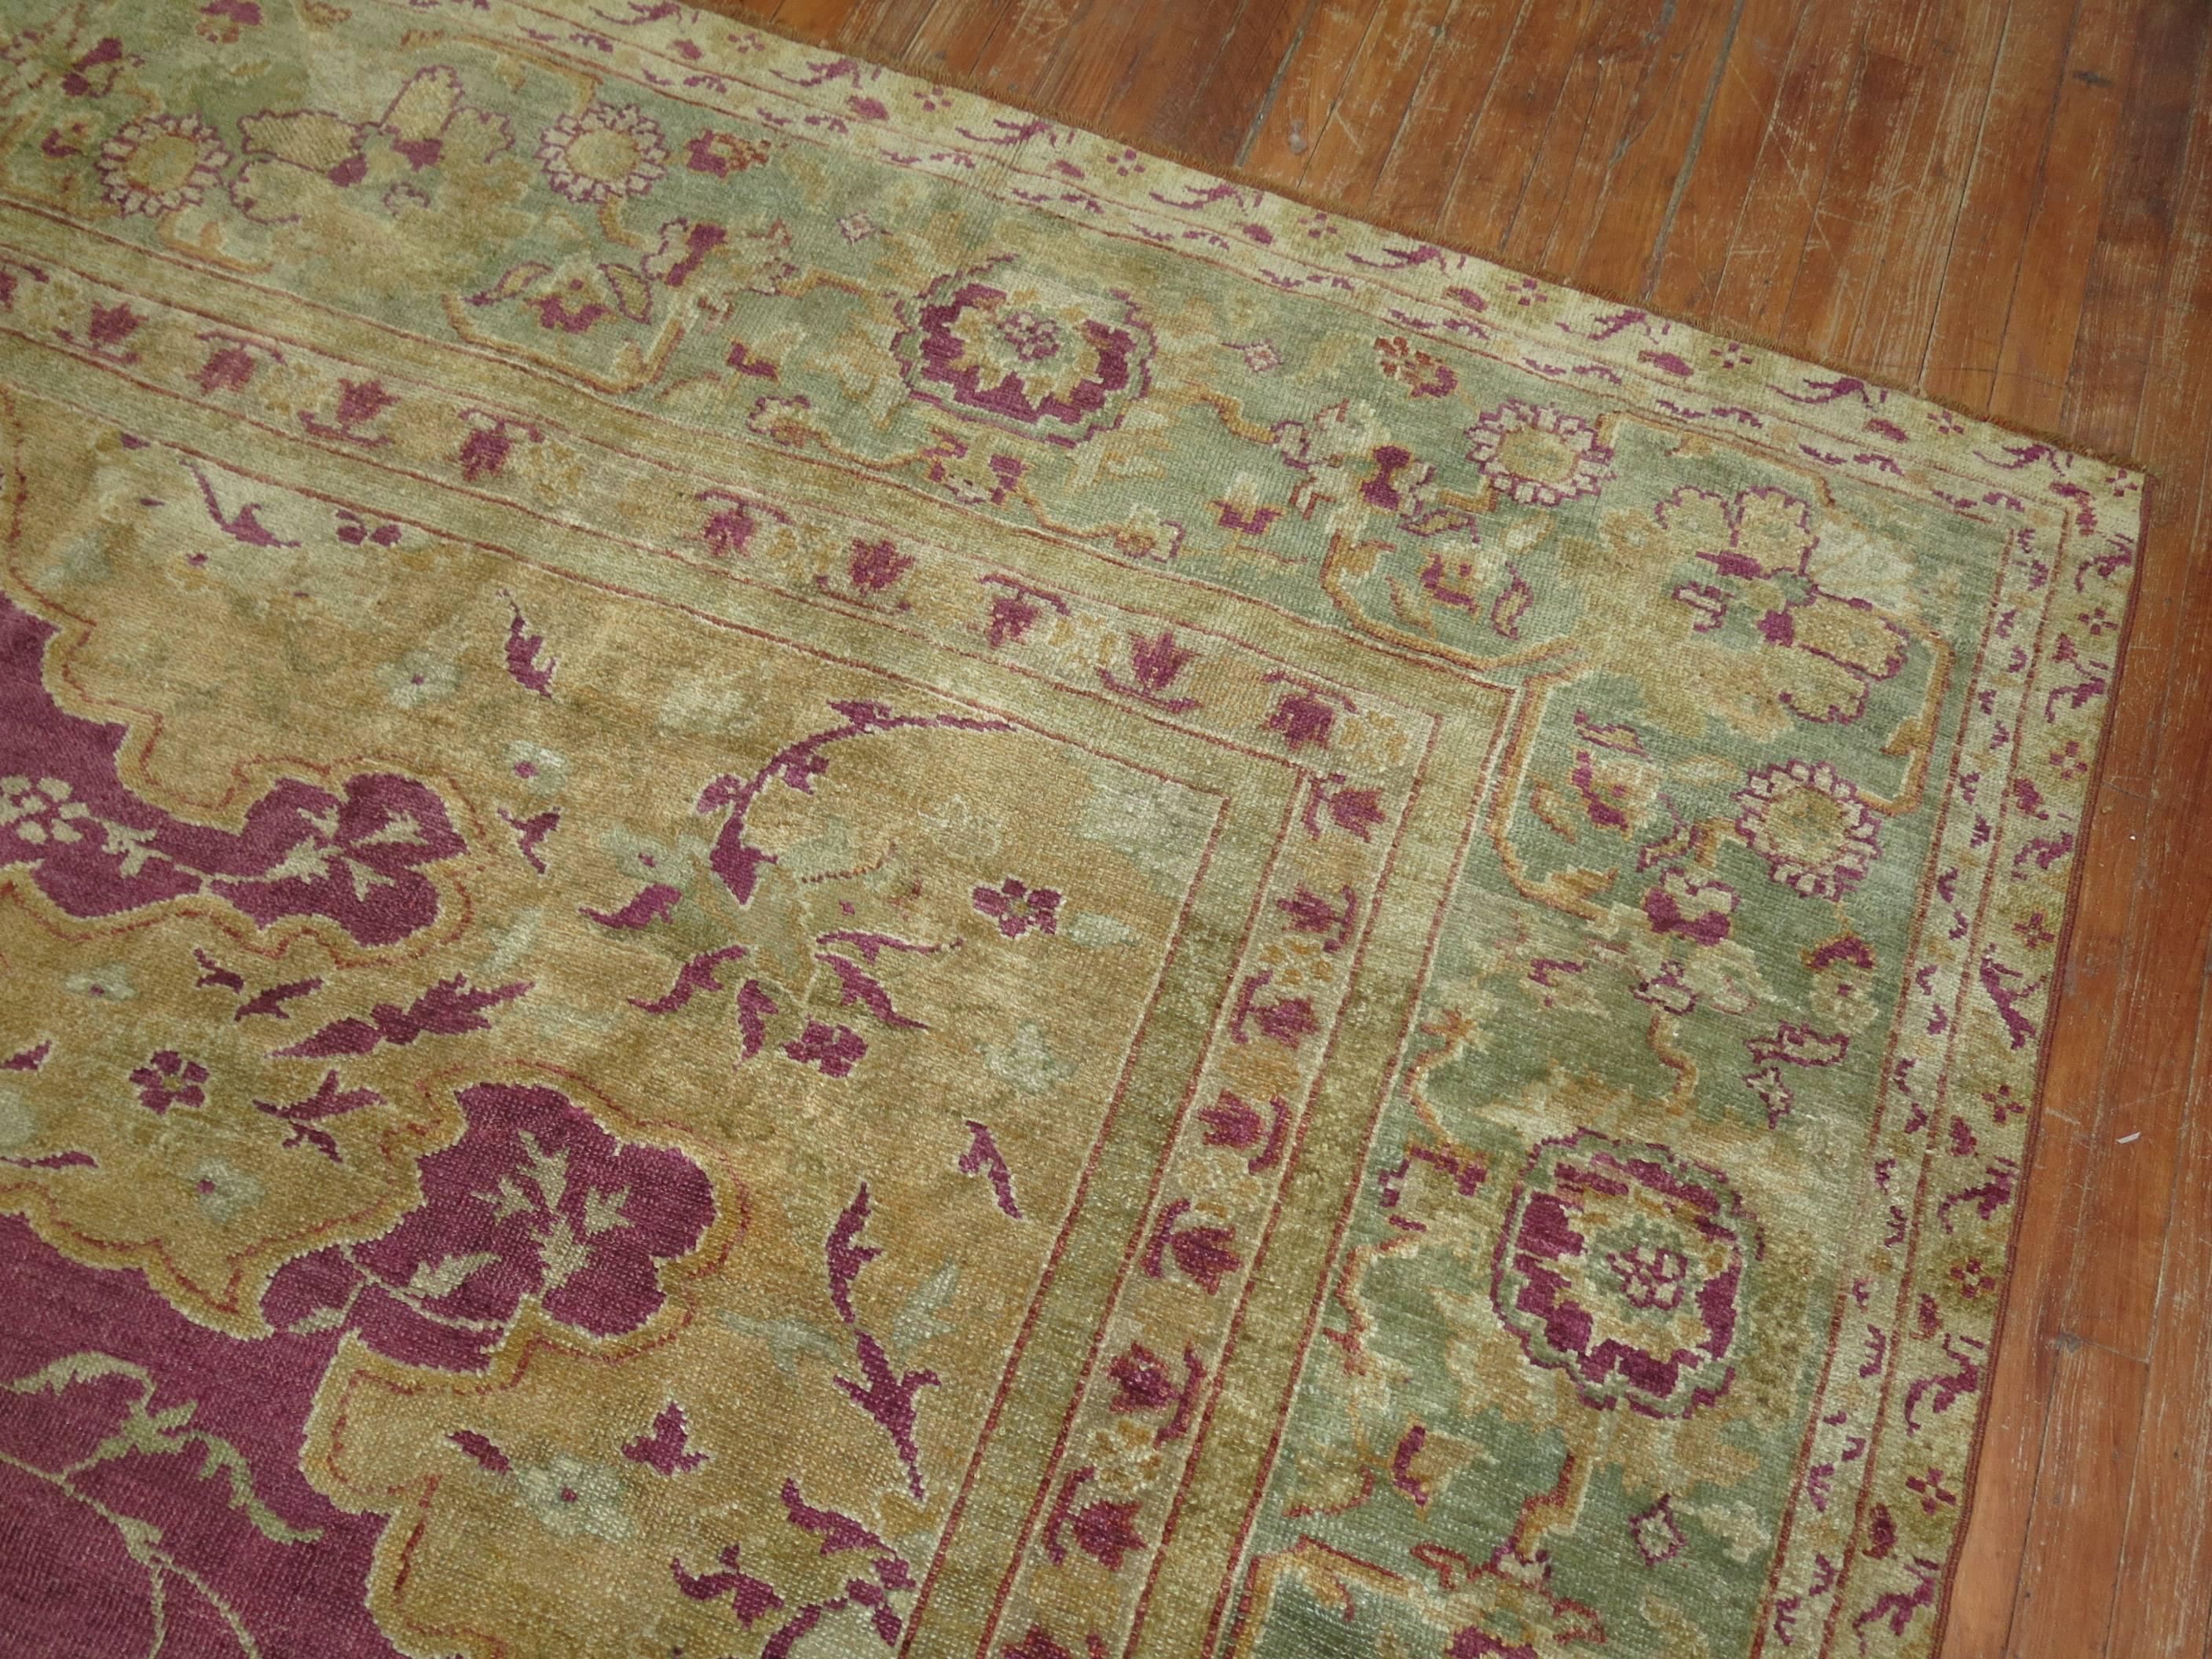 An early 20th century Turkish Ghiordes rug. Plum field, mint green medallion and border with gold accents.

Measures: 12'3'' x 15'7'' circa 1920

Since the beginning of their production in the 18th century, rugs from the Anatolian town, Ghiordes